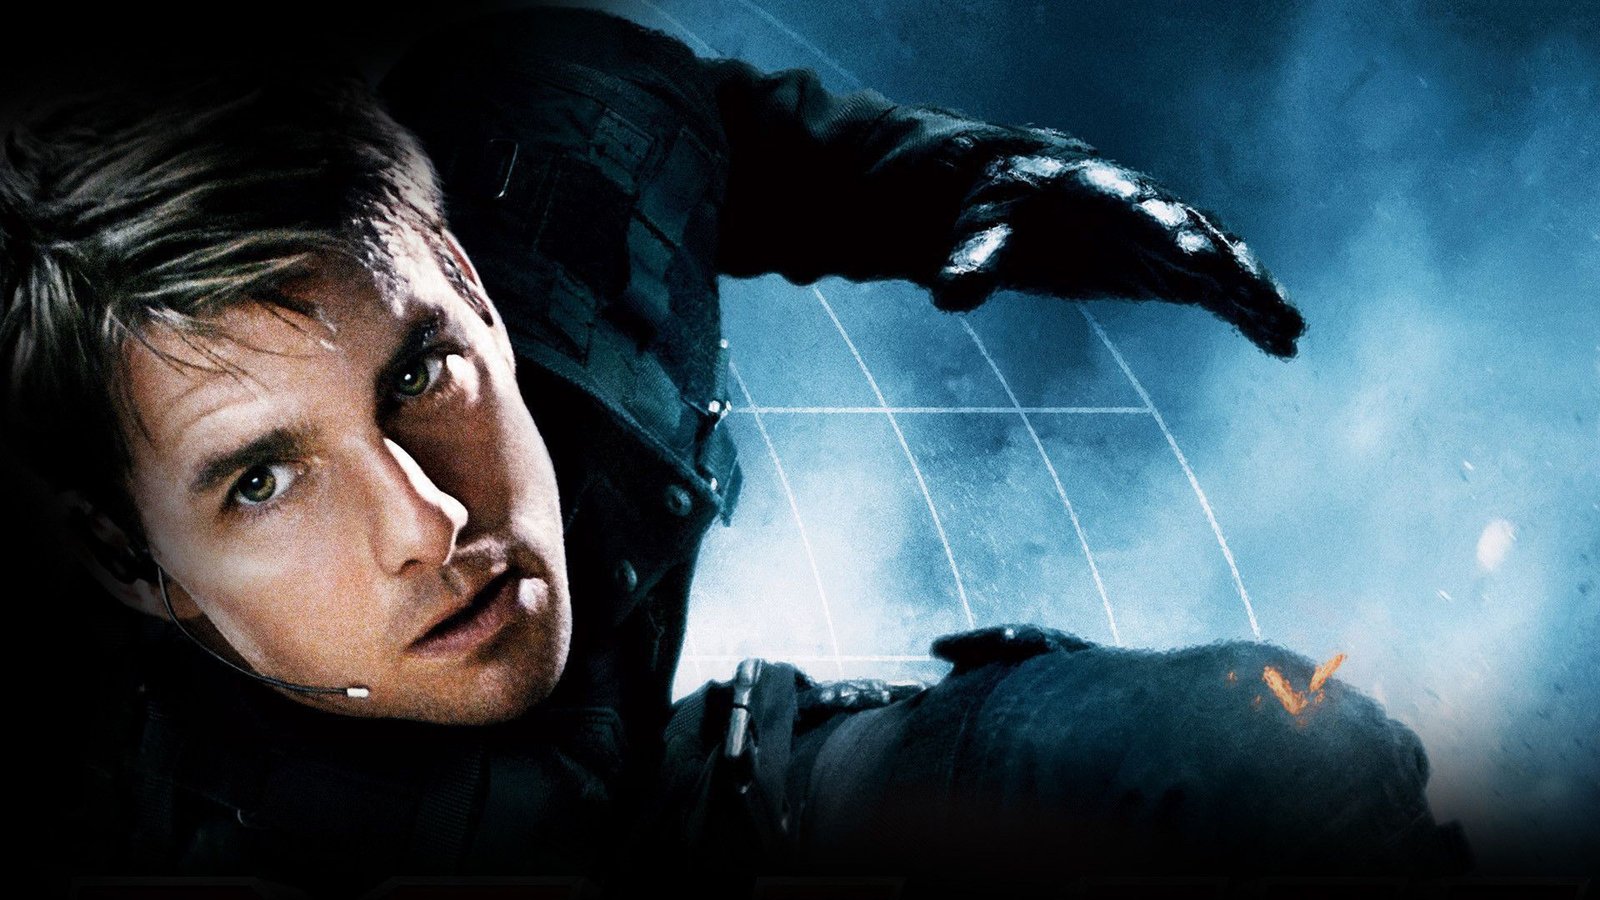  / Mission: Impossible III